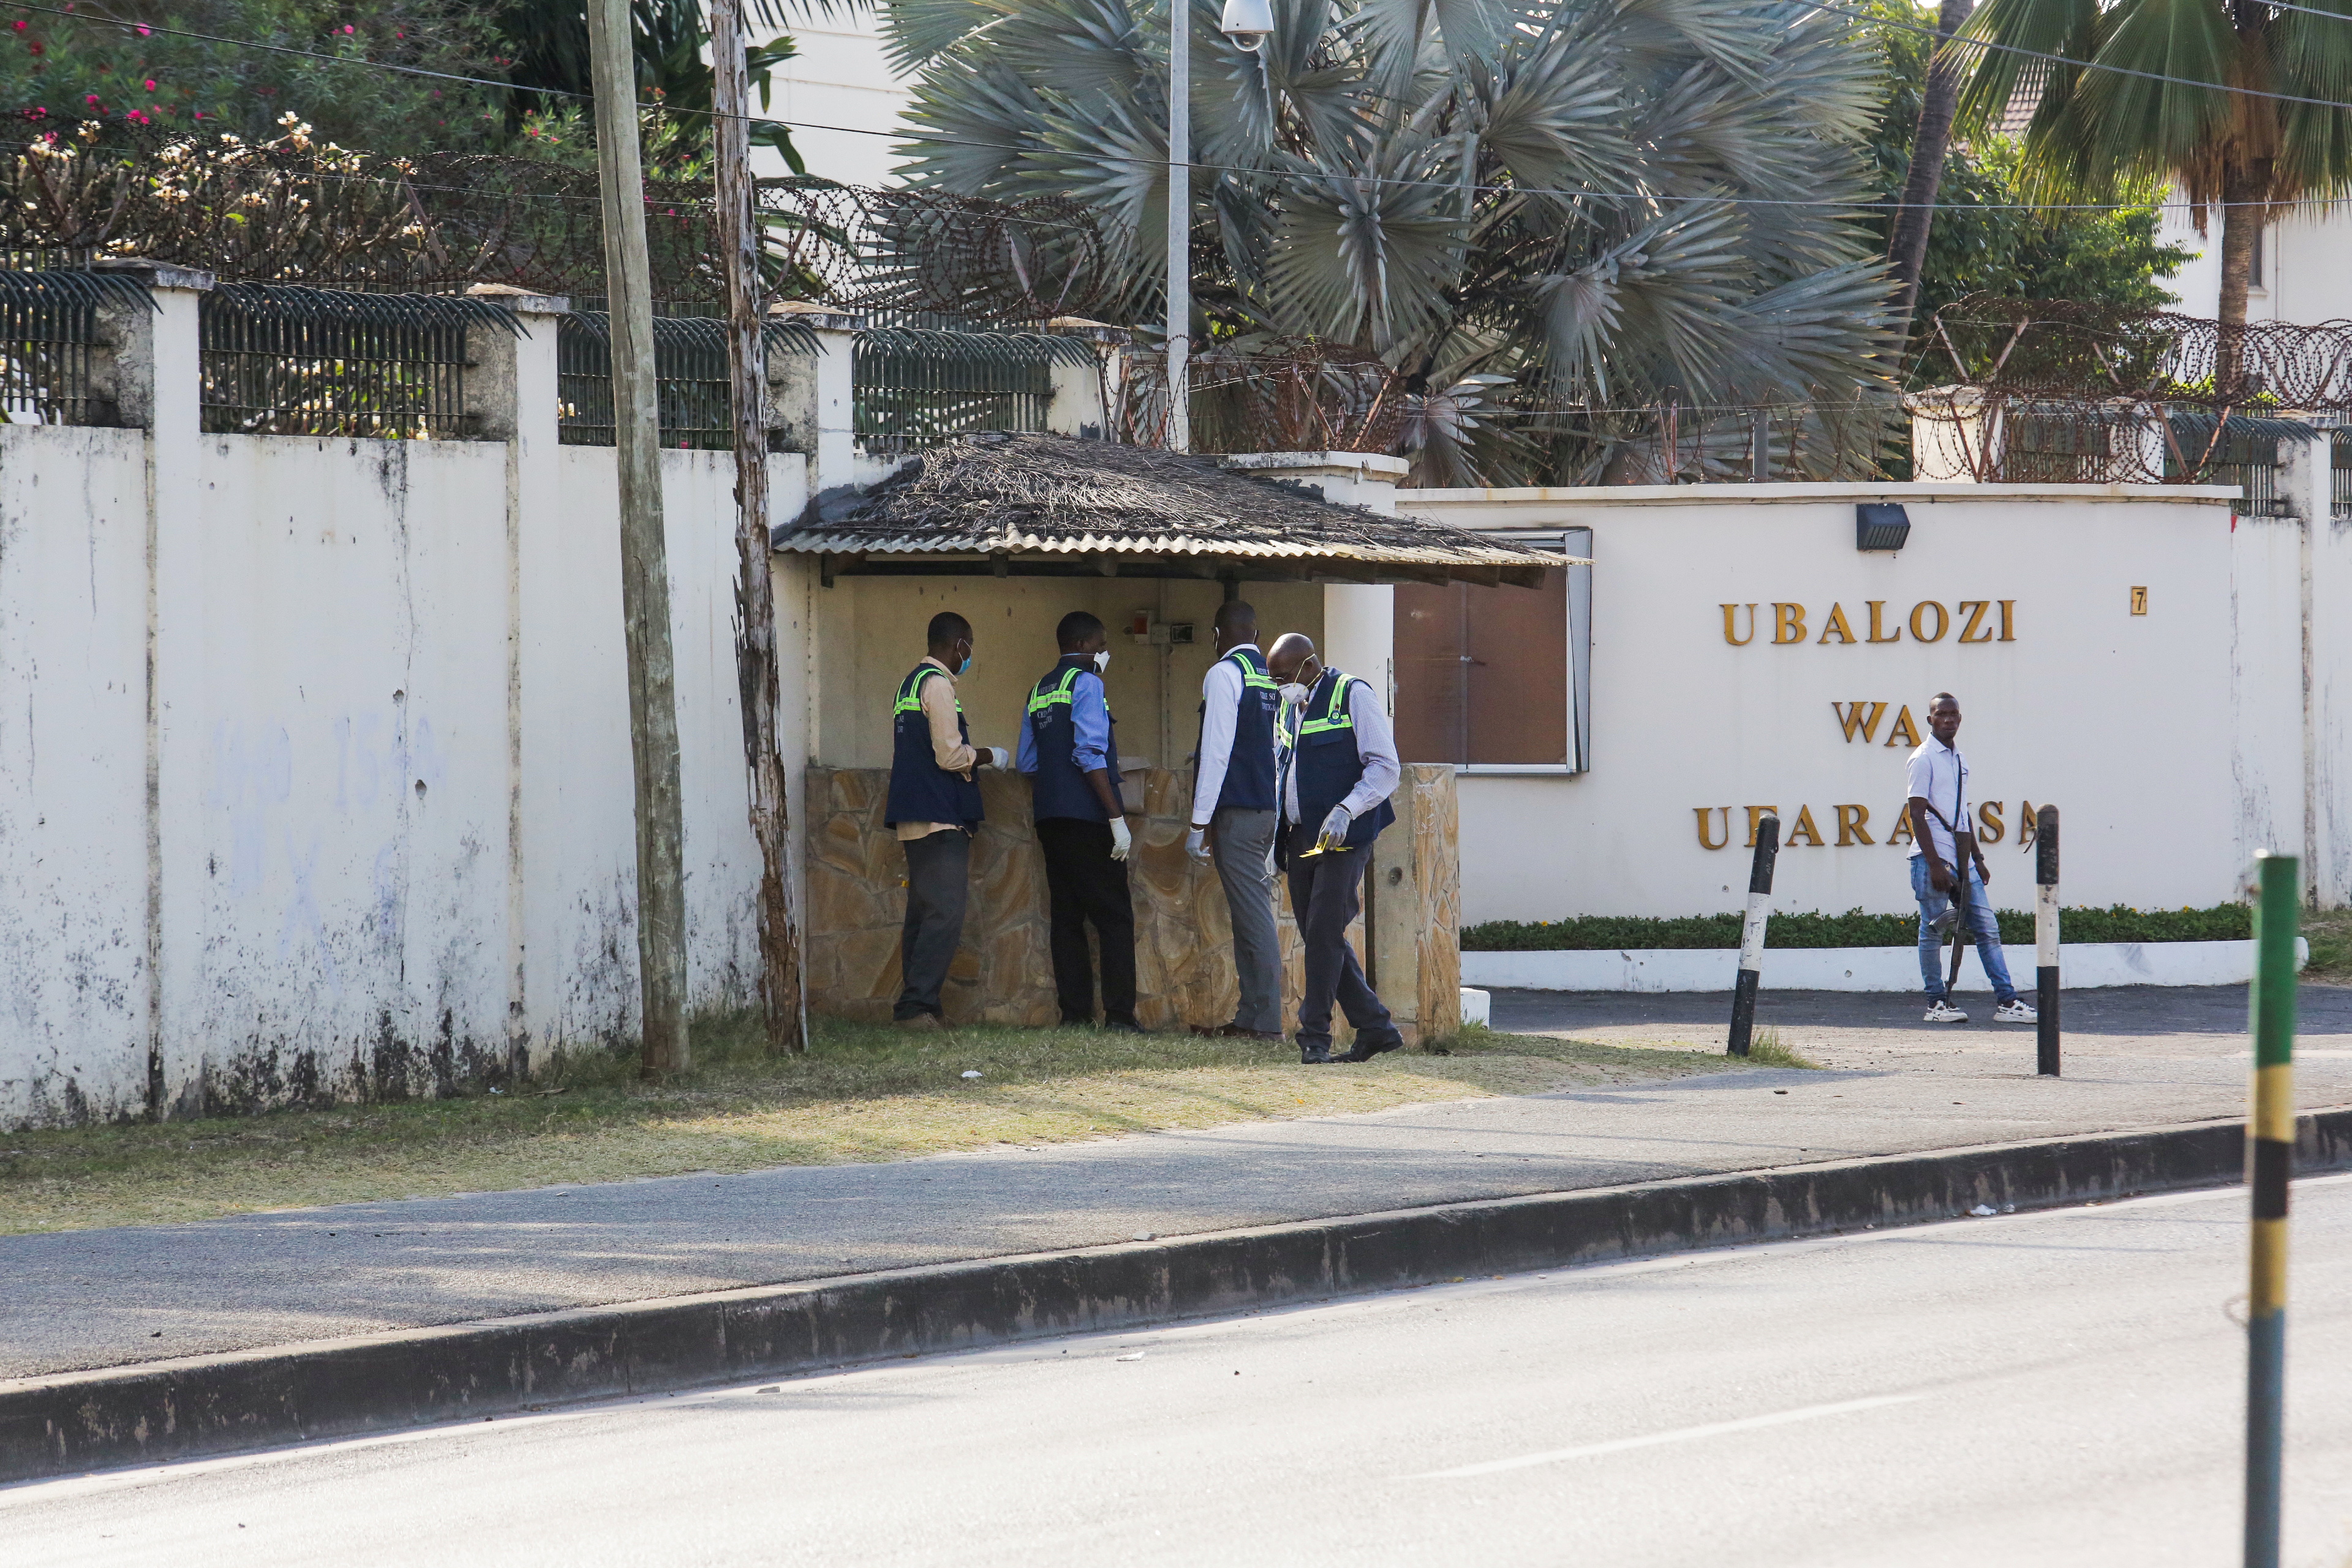 Tanzanian security officers guard an entrance to the French embassy after an attacker wielding an assault rifle was killed in the Salenda area of Dar es Salaam